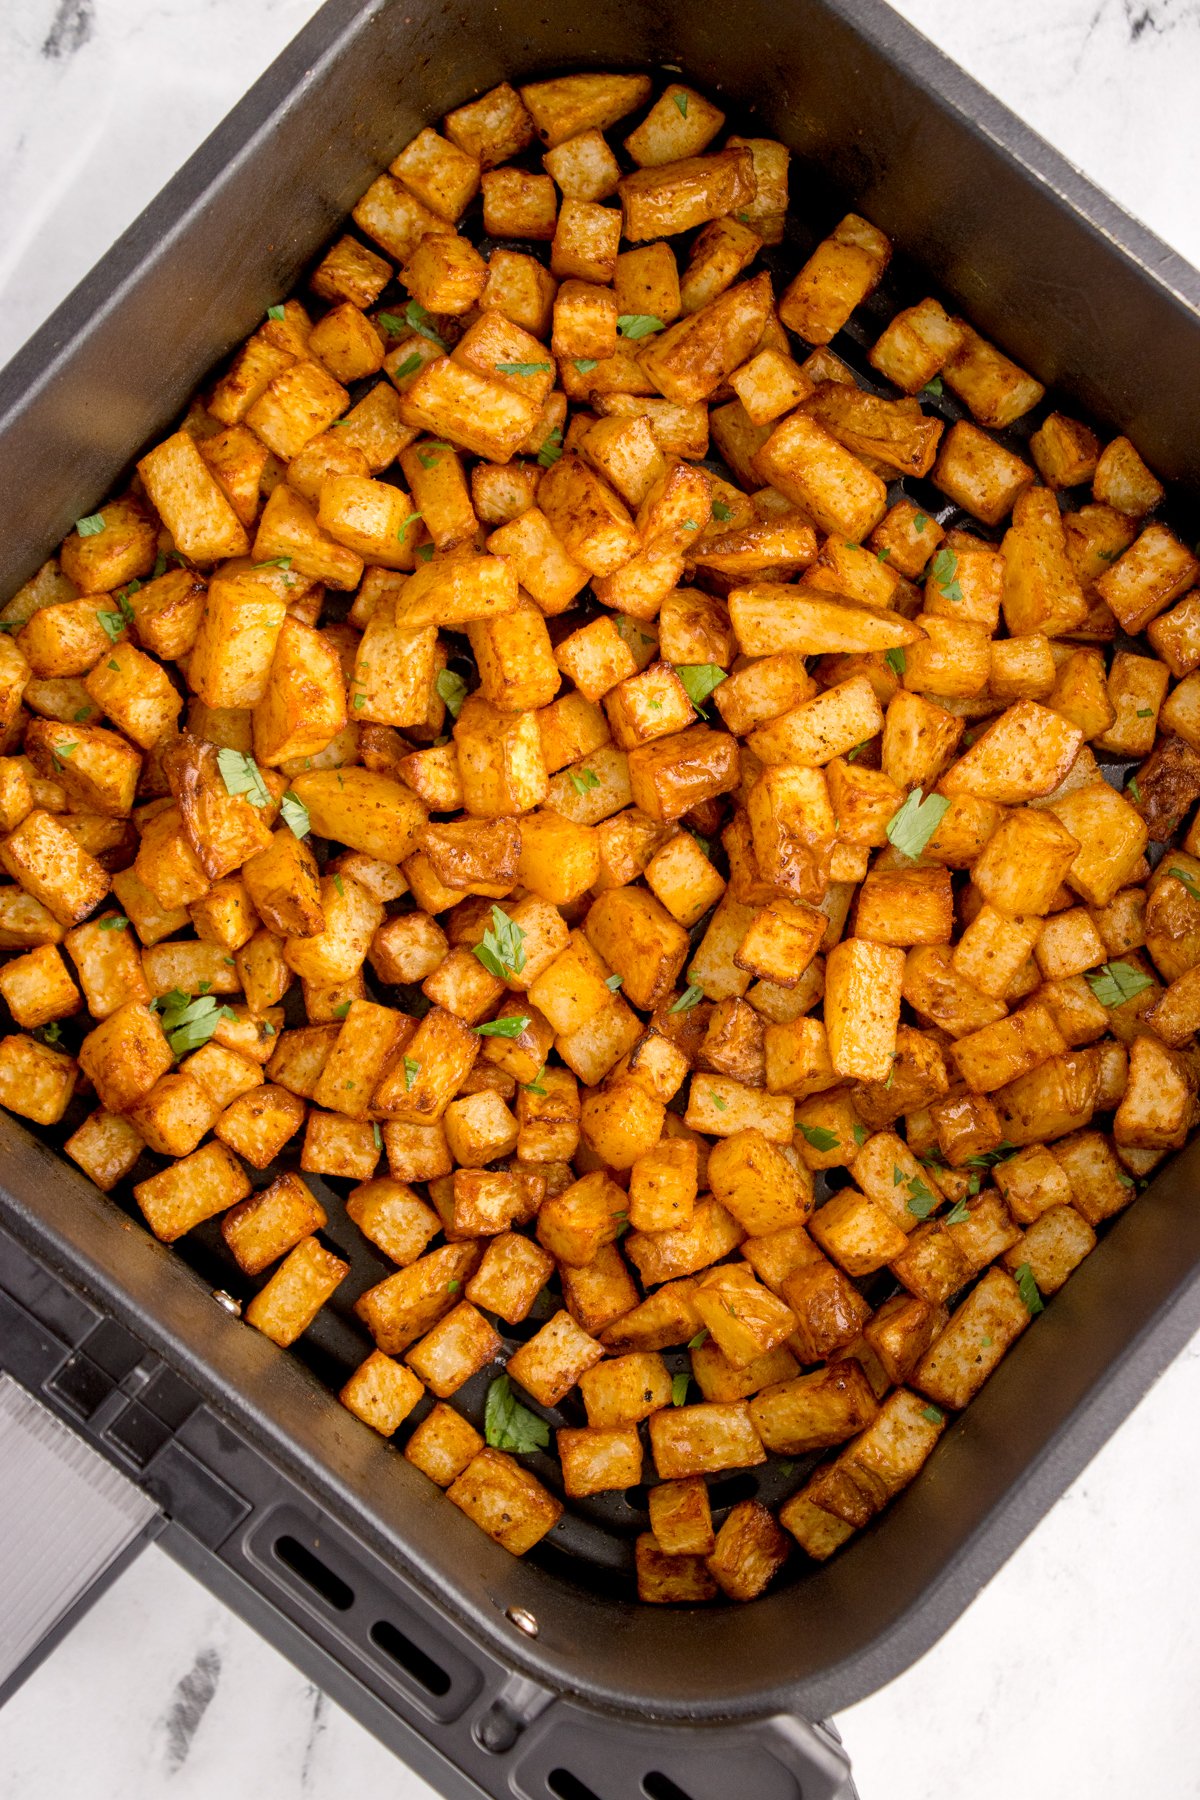 An air fryer basket filled with cooked diced breakfast potatoes that are garnished with chopped parsley.